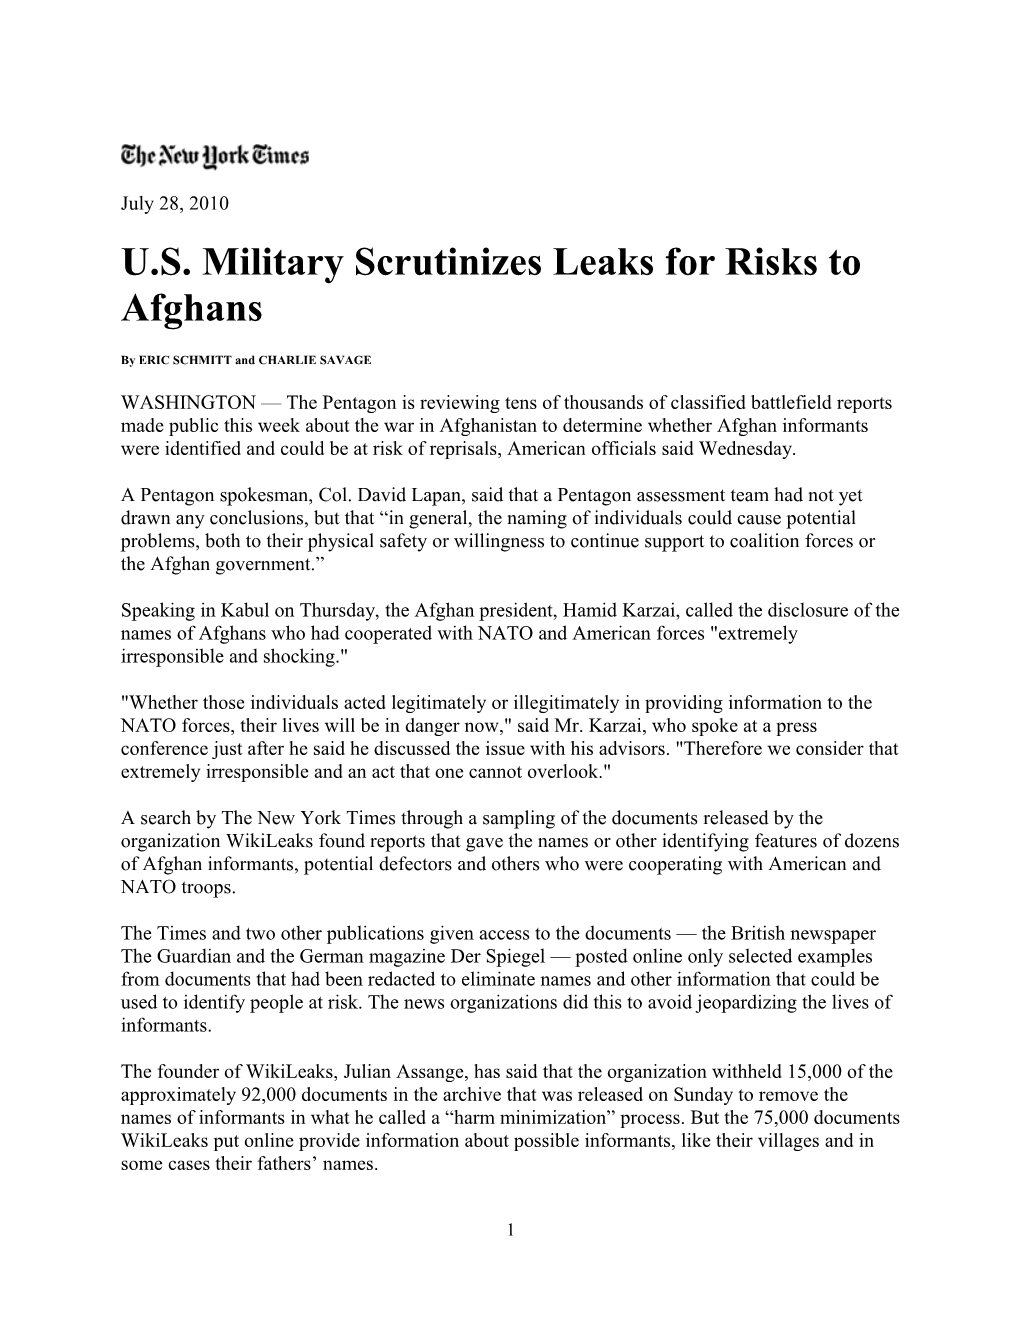 U.S. Military Scrutinizes Leaks for Risks to Afghans